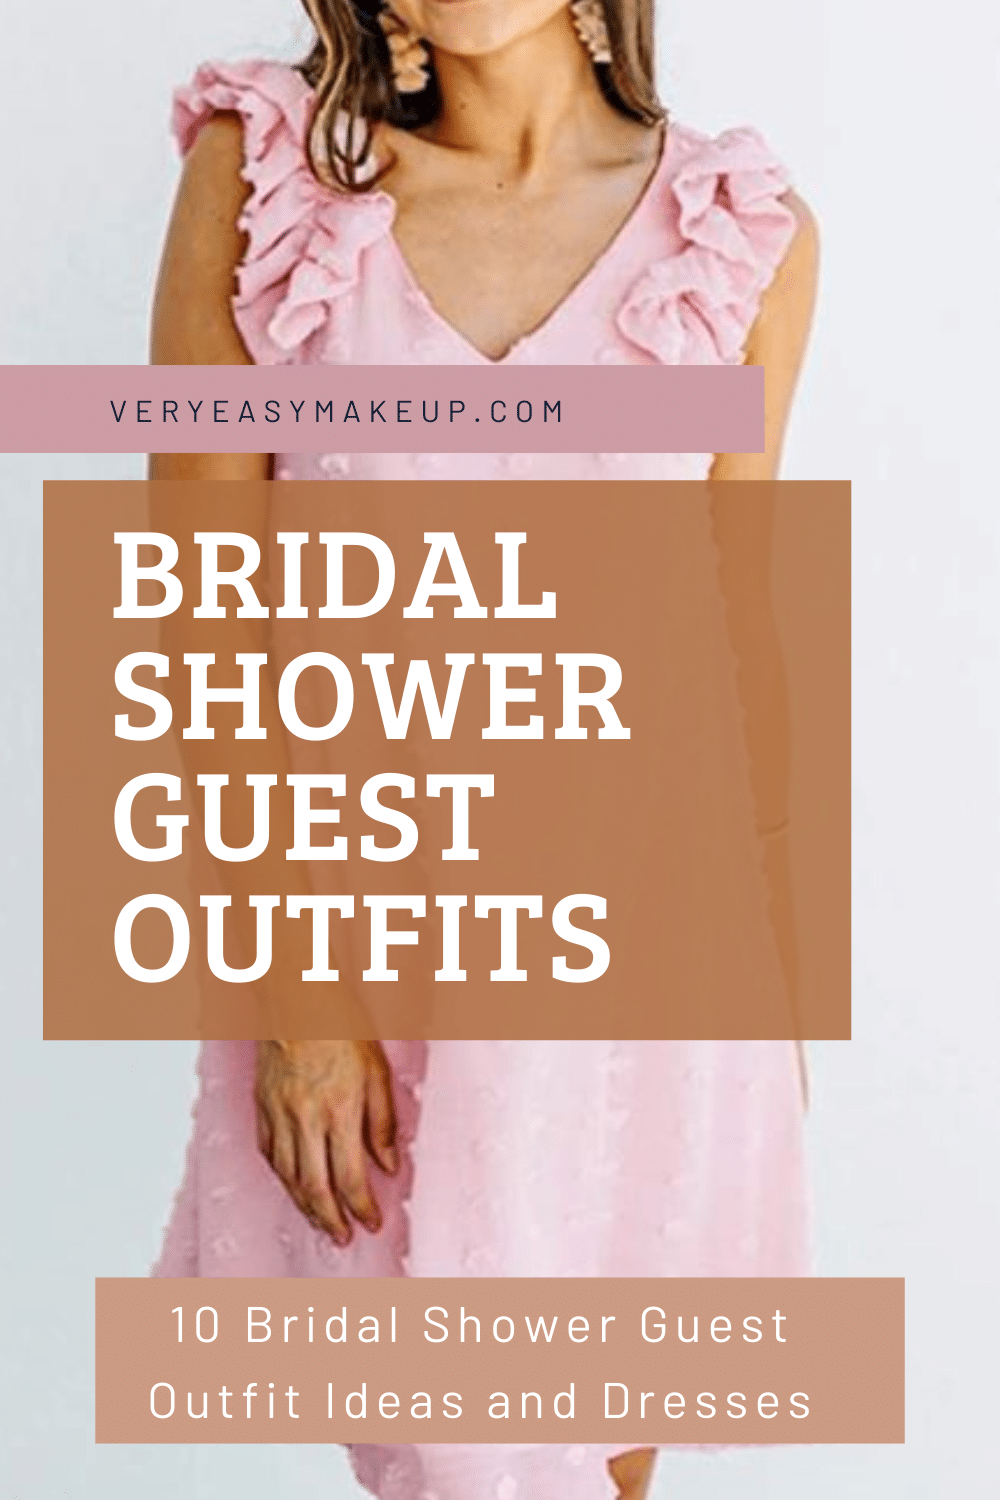 Bridal Shower Guest Outfit Ideas by Very Easy Makeup